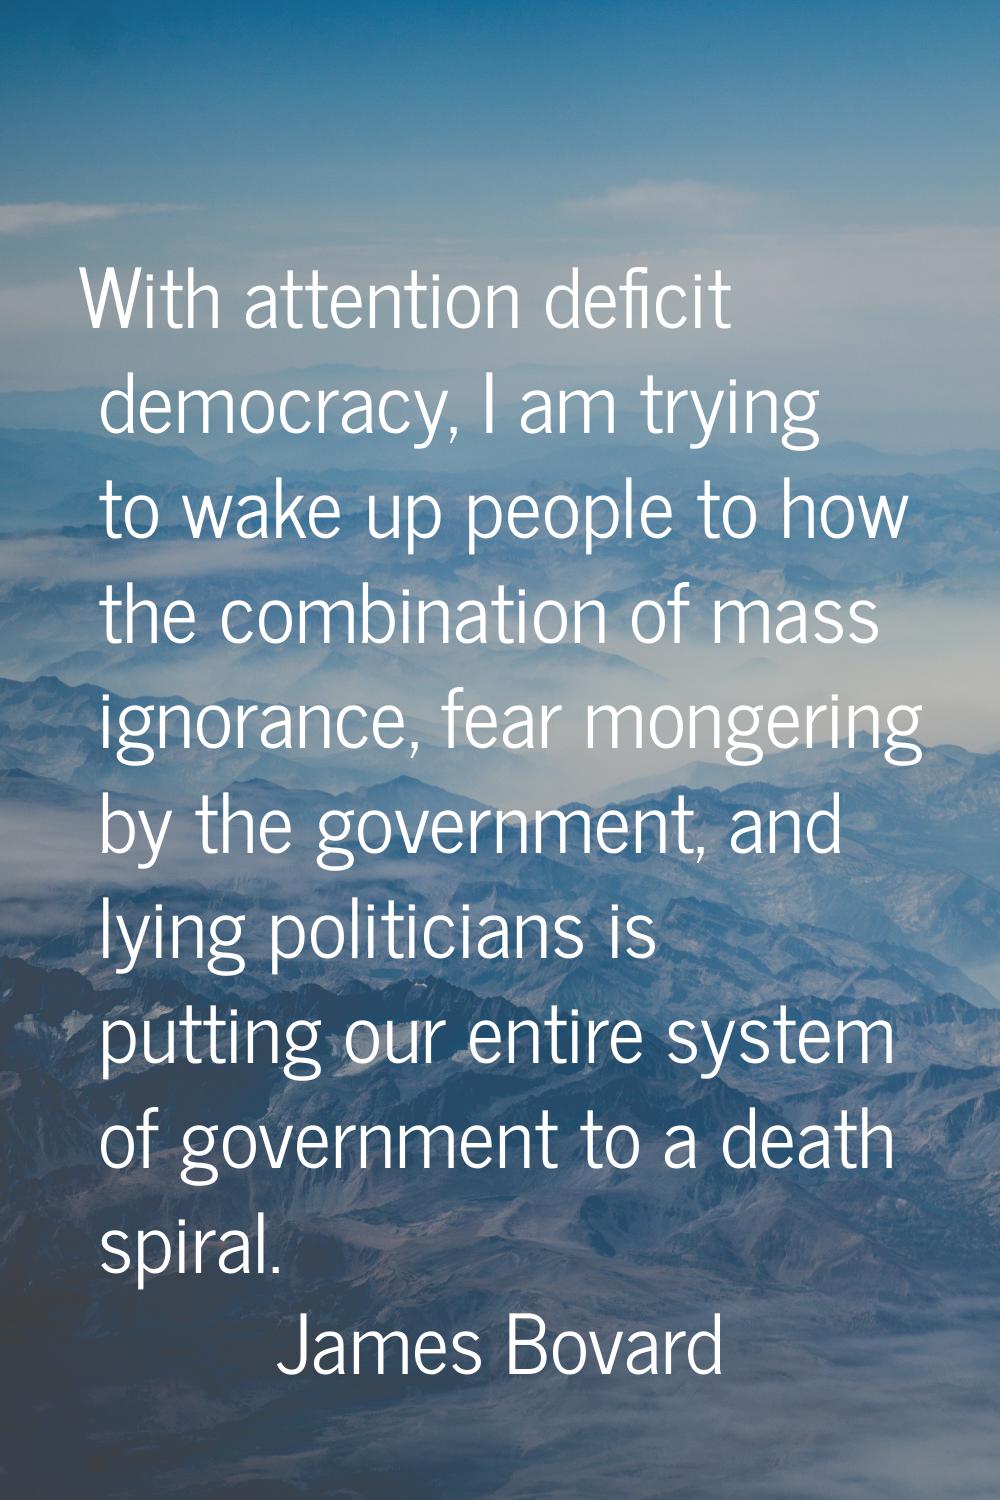 With attention deficit democracy, I am trying to wake up people to how the combination of mass igno